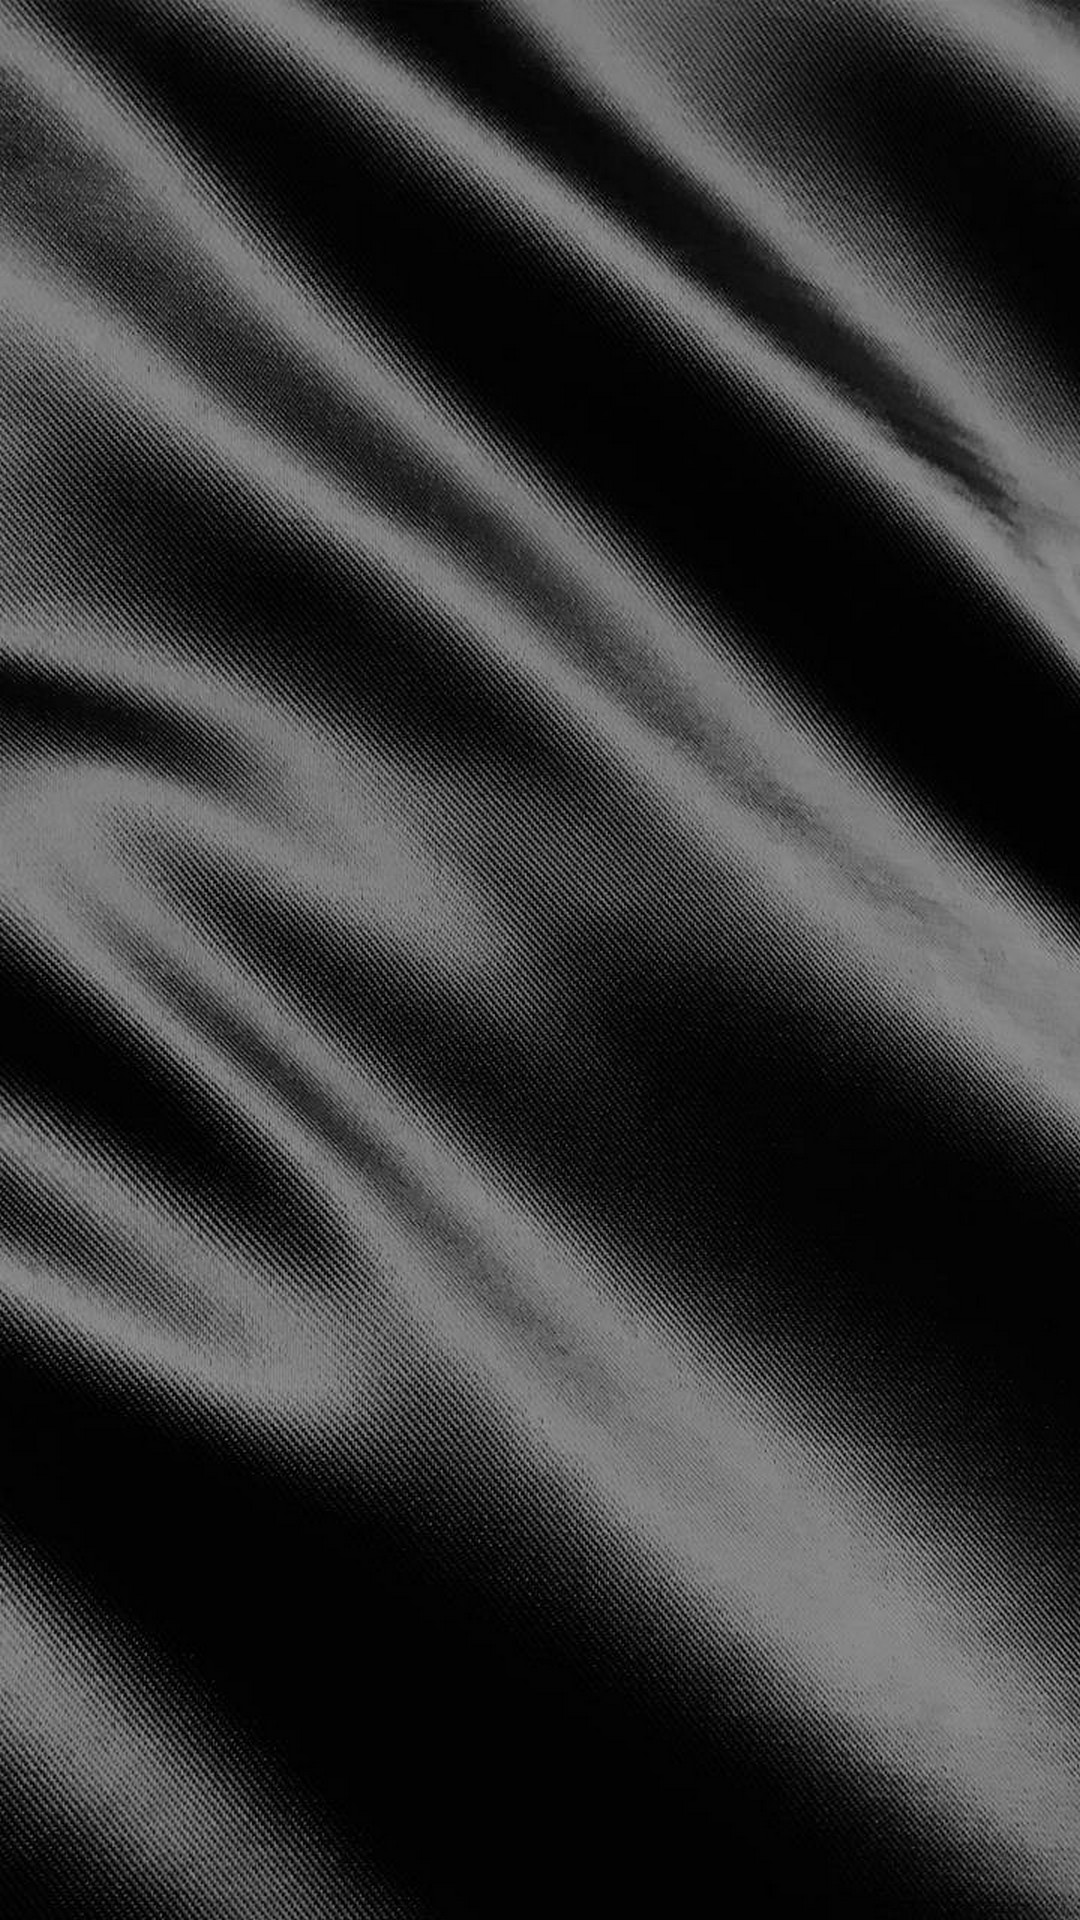 Black Silk iPhone 7 Wallpaper HD with high-resolution 1080x1920 pixel. Download all Mobile Wallpapers and Use them as wallpapers for your iPhone, Tablet, iPad, Android and other mobile devices